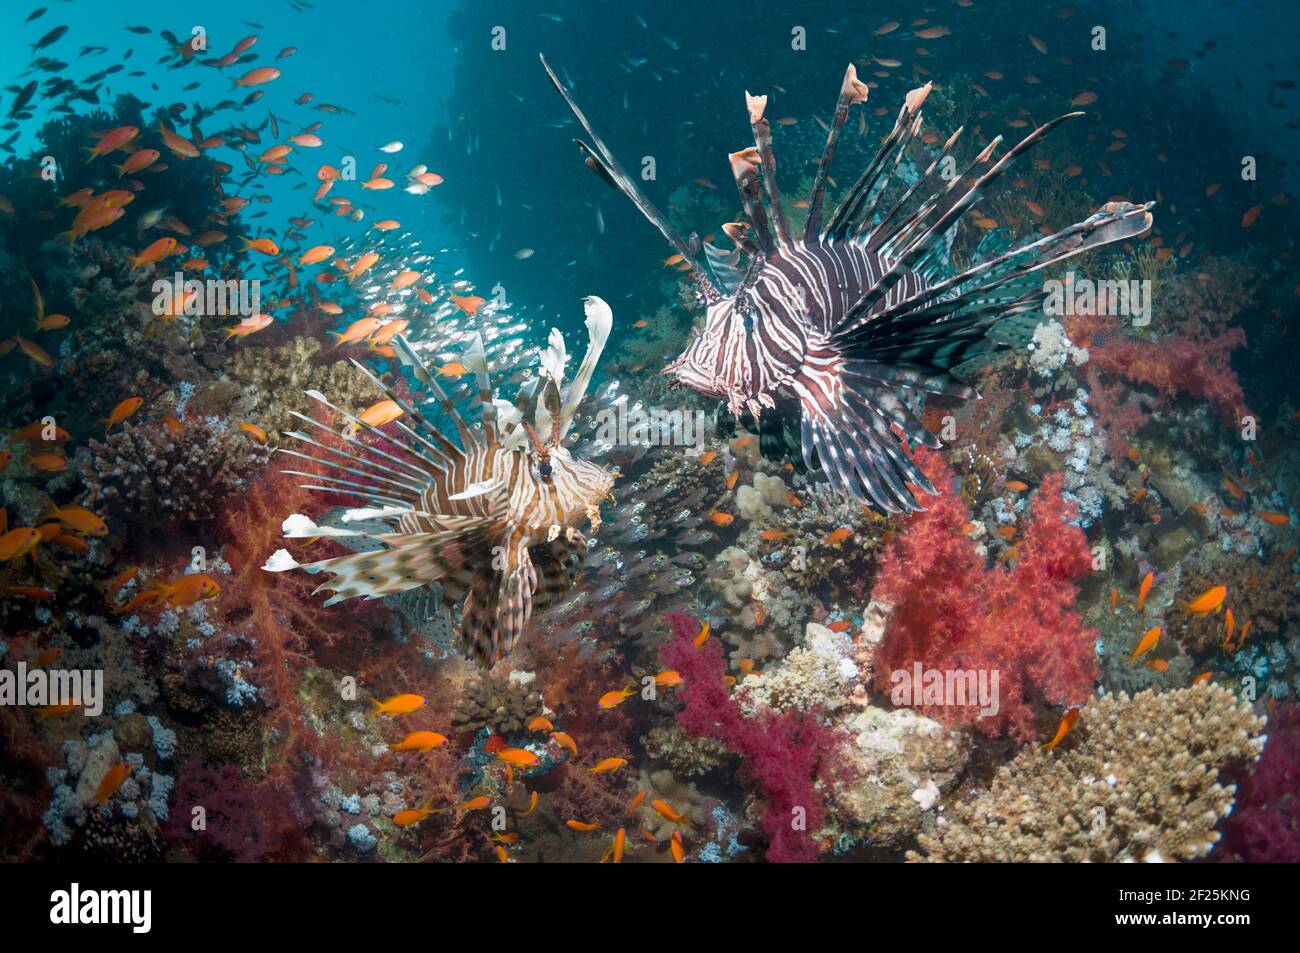 Coral reef scenery with a pair of Red lionfish (Pterois volitans), soft corals (Dendronephthya sp) and a school of Pygmy sweepers (Parapriacanthus gue Stock Photo